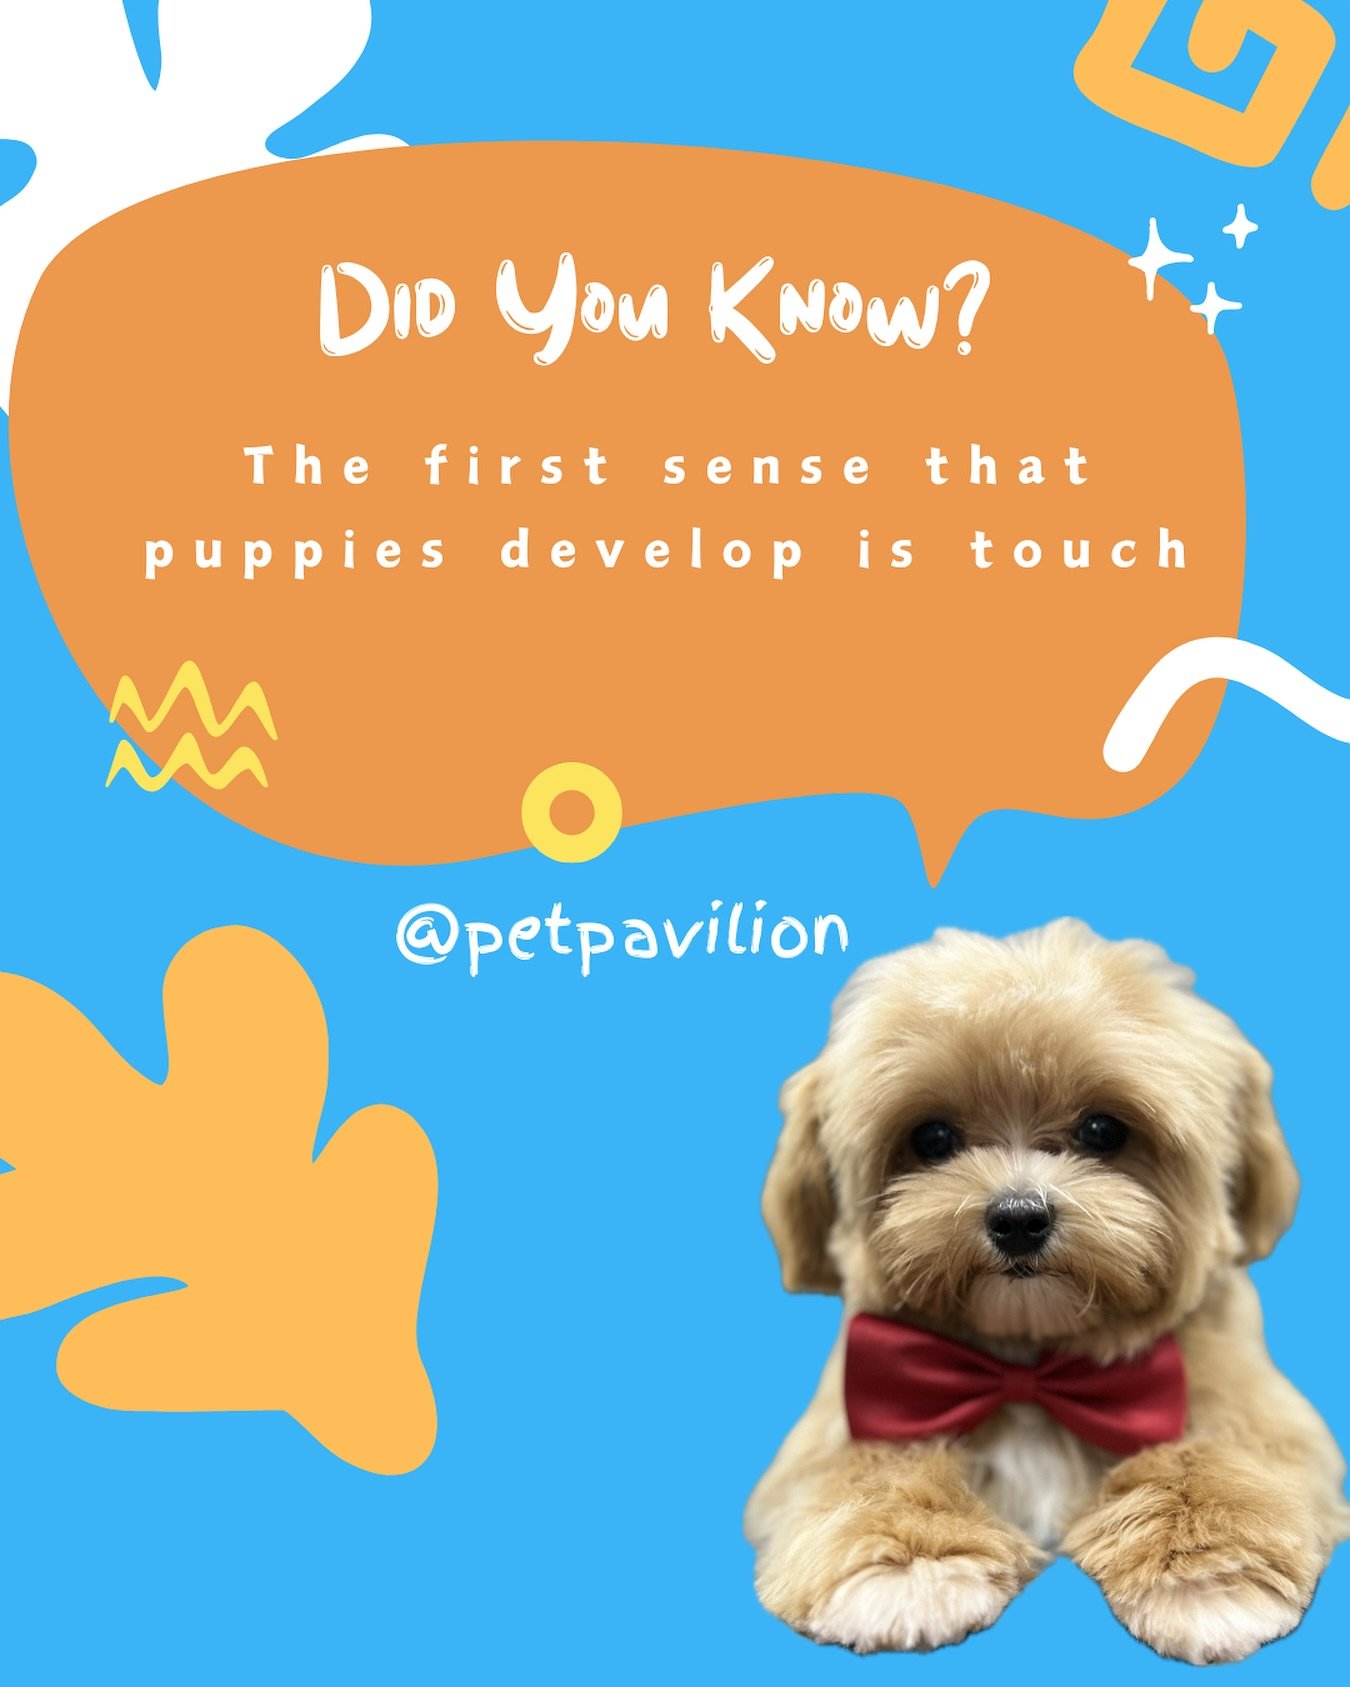 🐶🐾From the moment they&rsquo;re born, their sensitive paws and noses help them explore the world around them. It&rsquo;s incredible how such a basic instinct sets the foundation for their bond with us.🐶💞
.
.
.
#petpavilion #funfact #dogfunfact #p